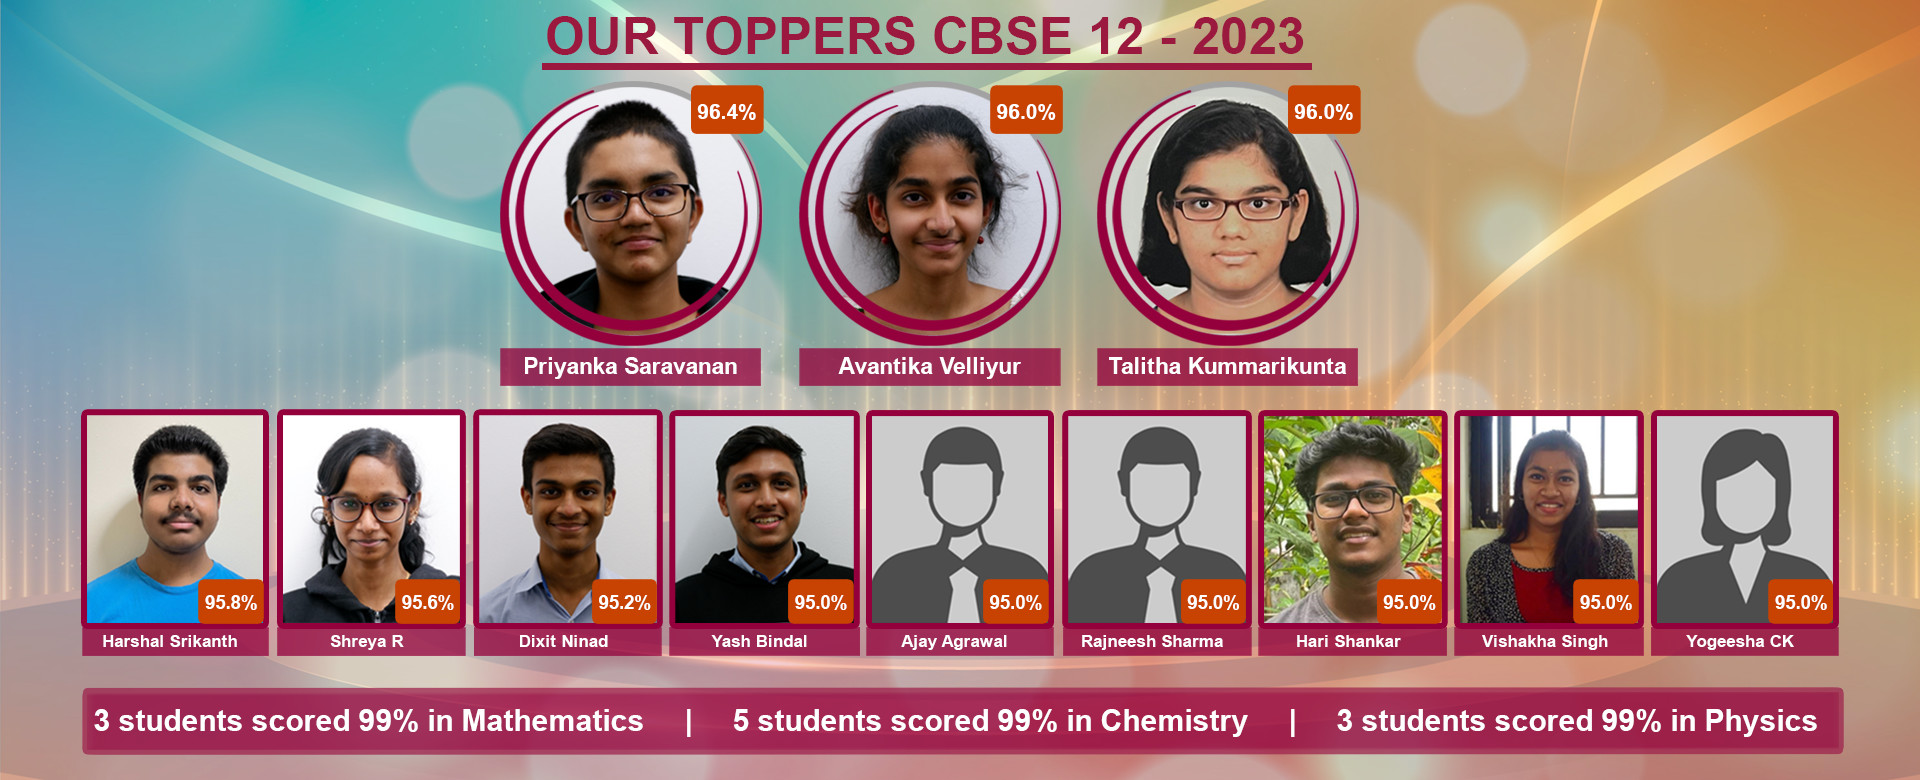 CBSE 12 Toppers 2023